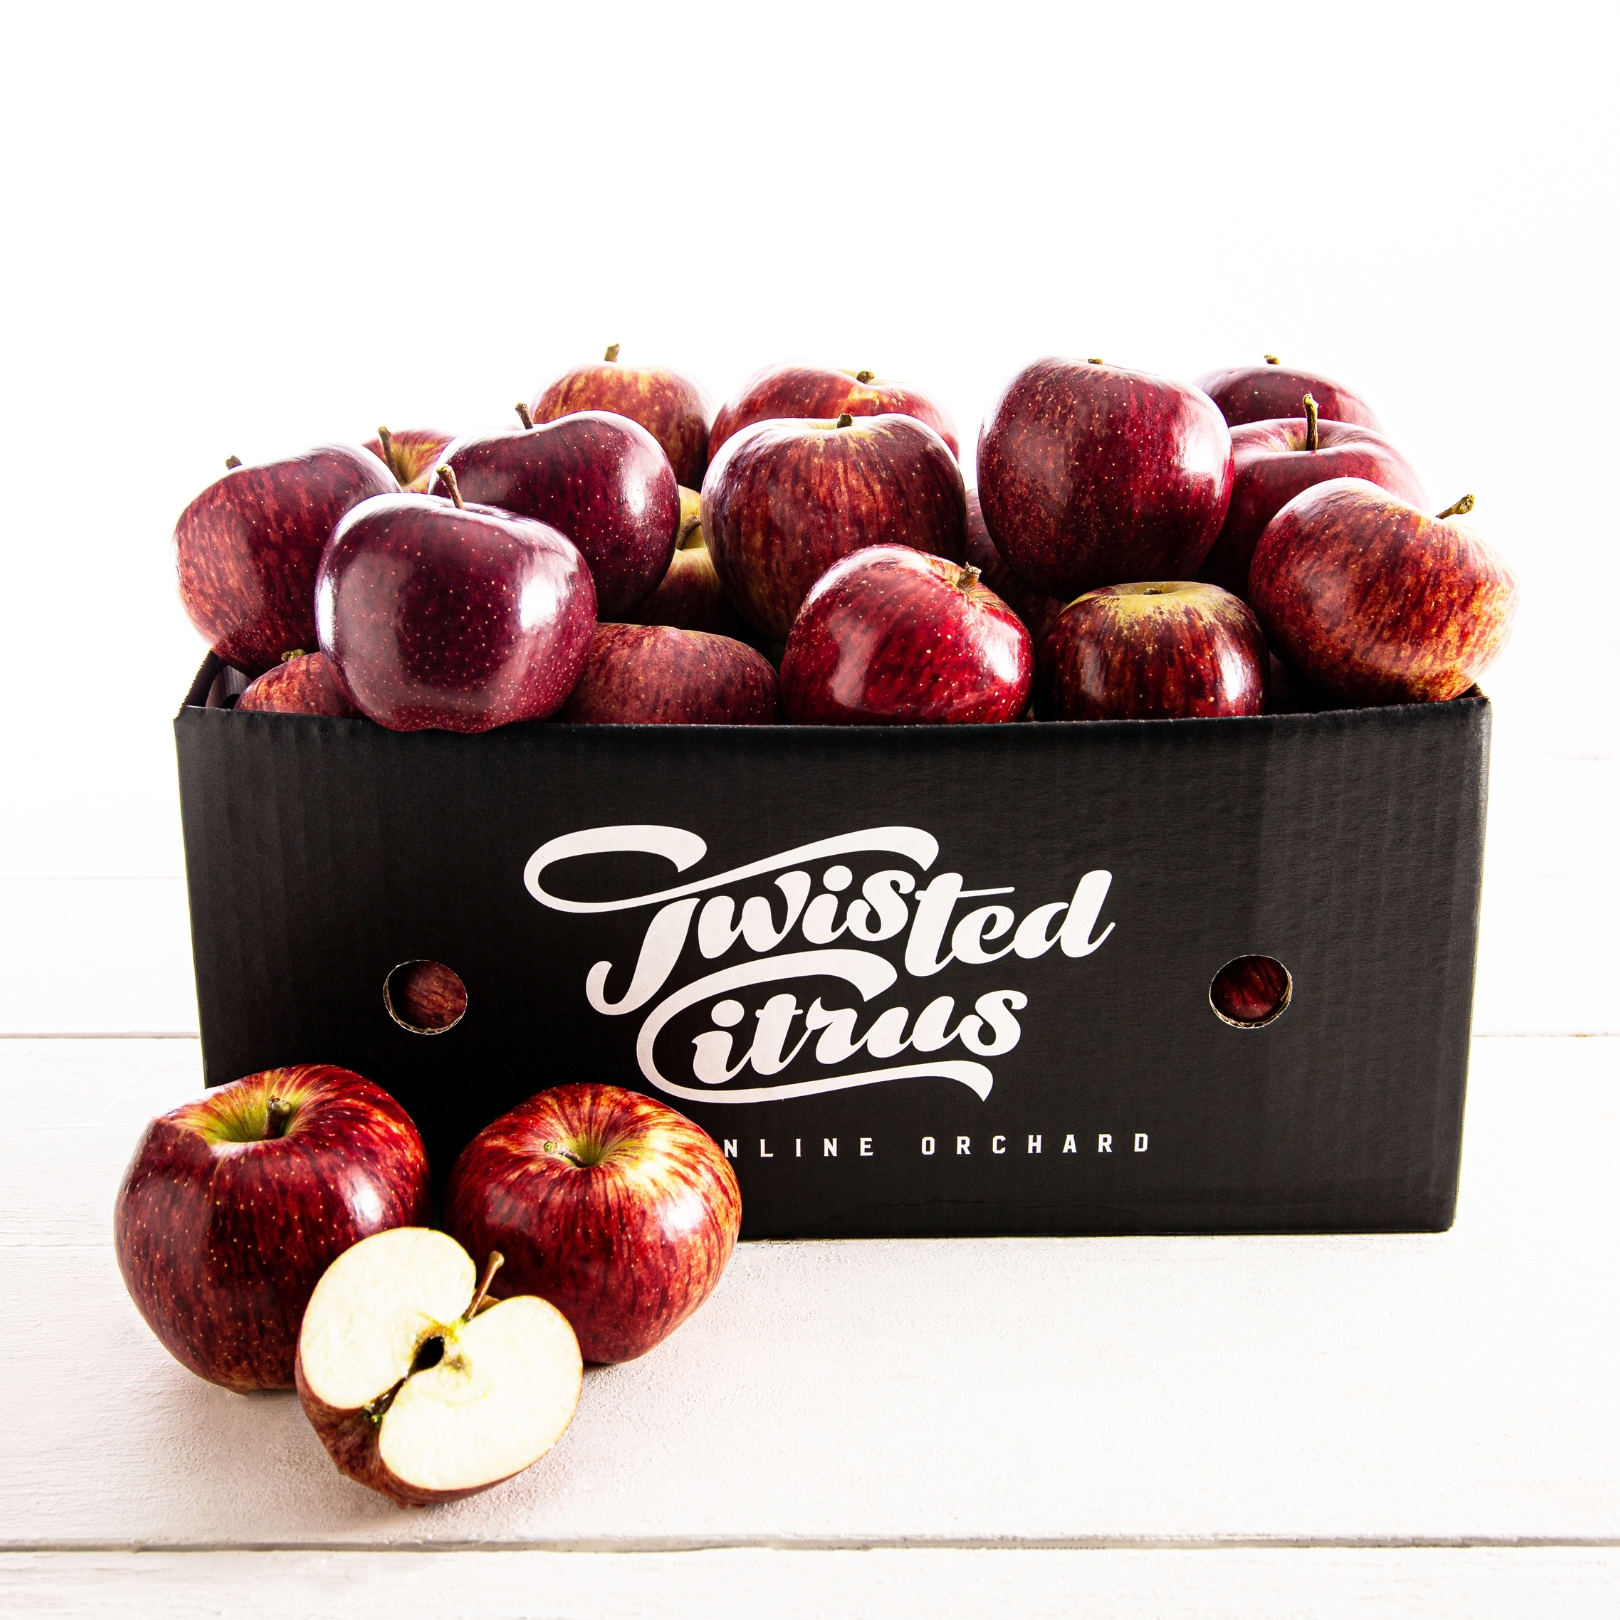 Buy Apples - Red Delicious Online NZ - Twisted Citrus